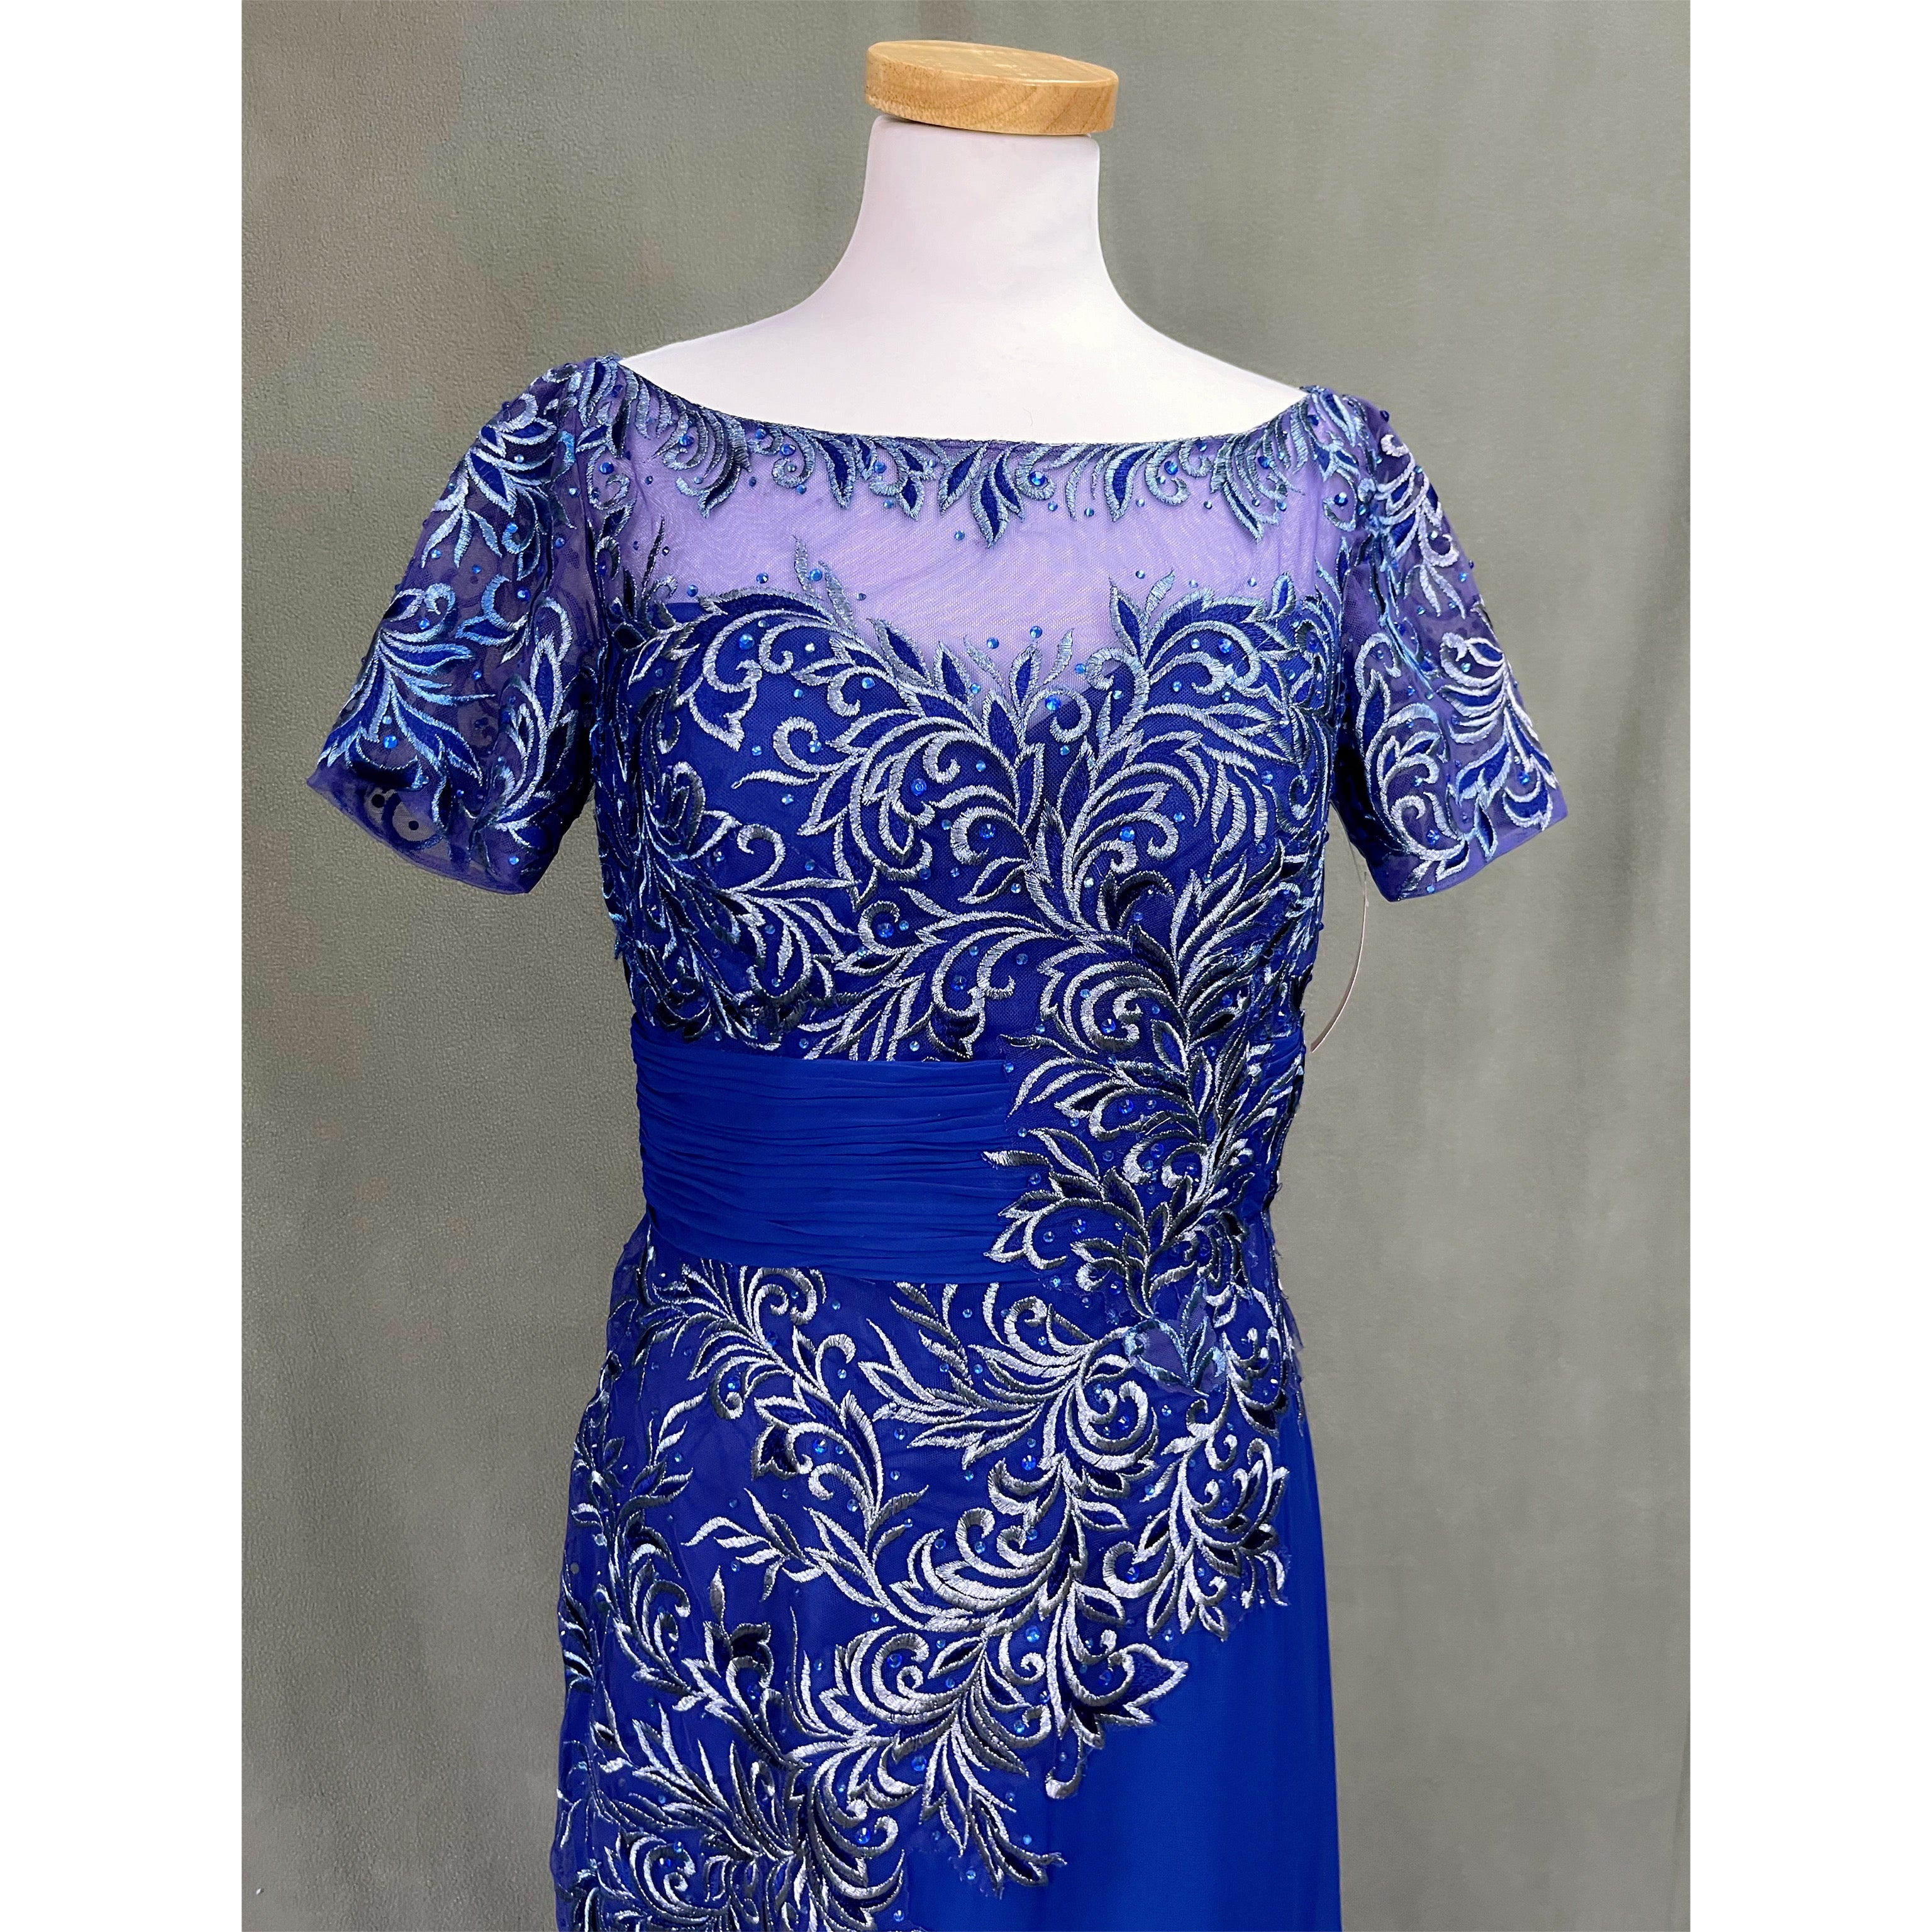 Cameron Blake royal blue dress, size 8, NEW WITH TAGS!